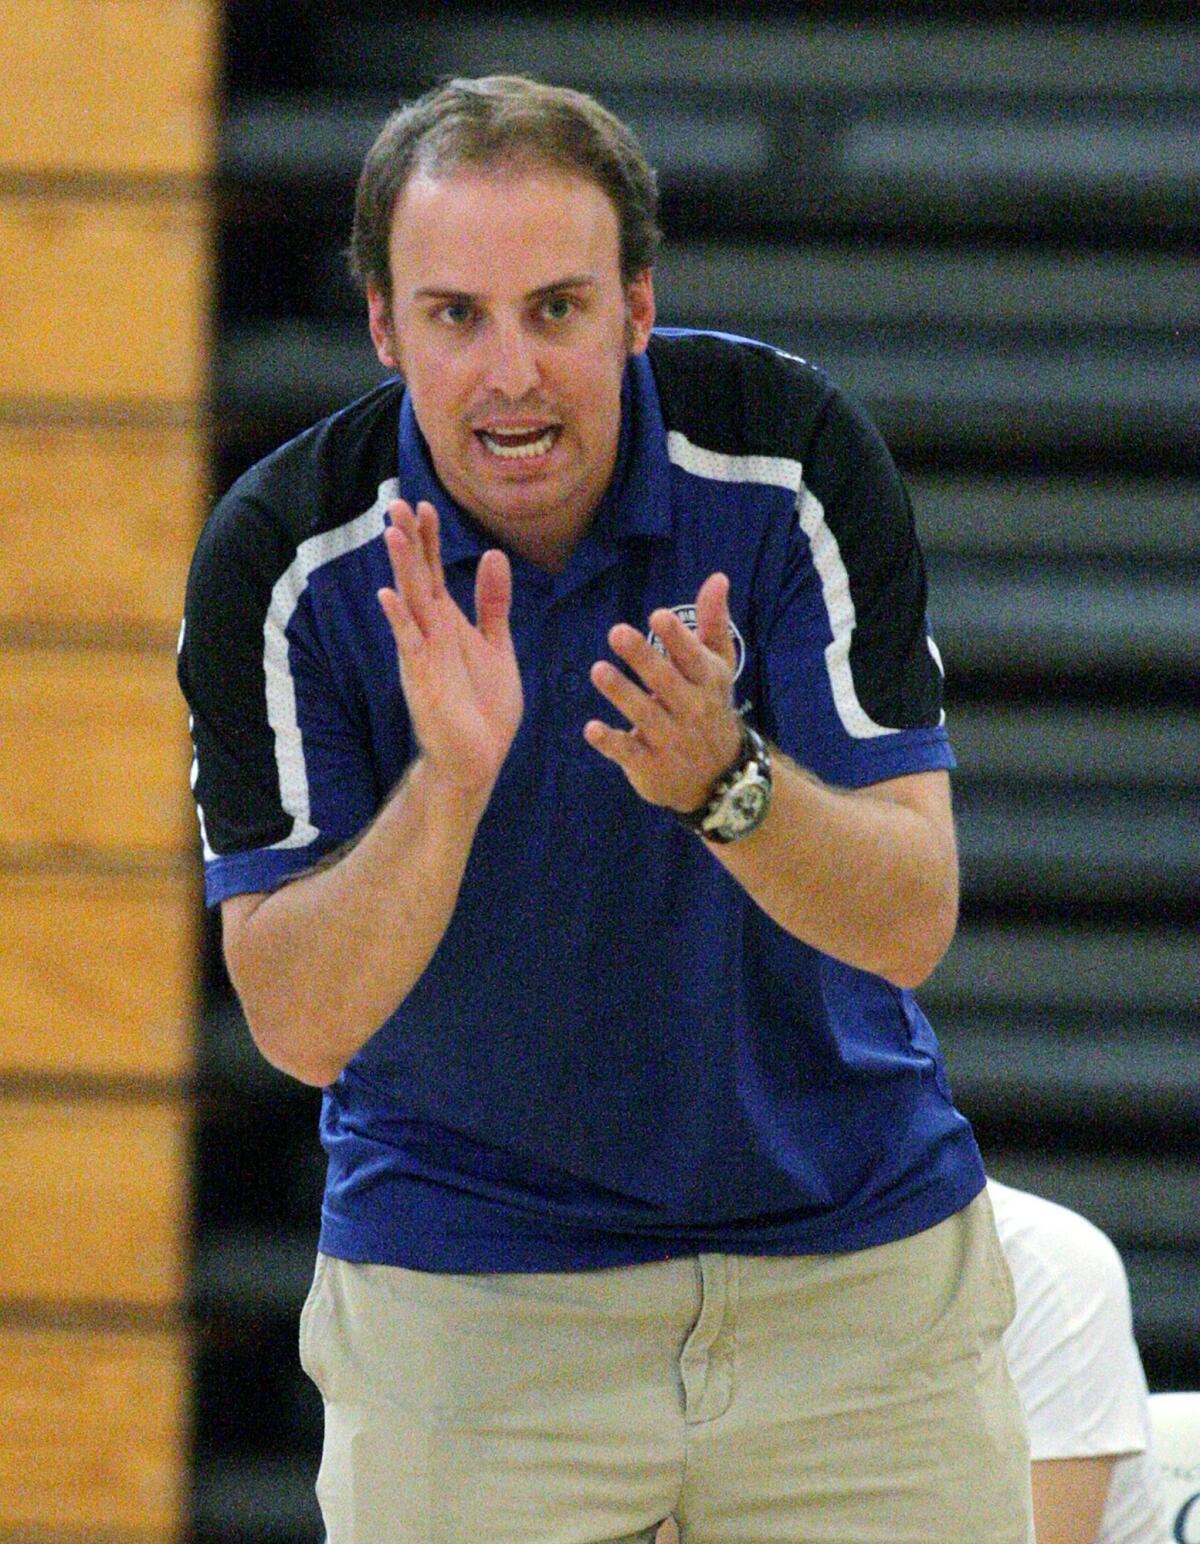 Burbank High girls' volleyball coach Kyle Roach applauds during a game against Crescenta Valley on Tuesday, September 30, 2014. Roach was arrested in June 2015 for having sexual relations with a former student and anonymously soliciting nudes from two volleyball players.